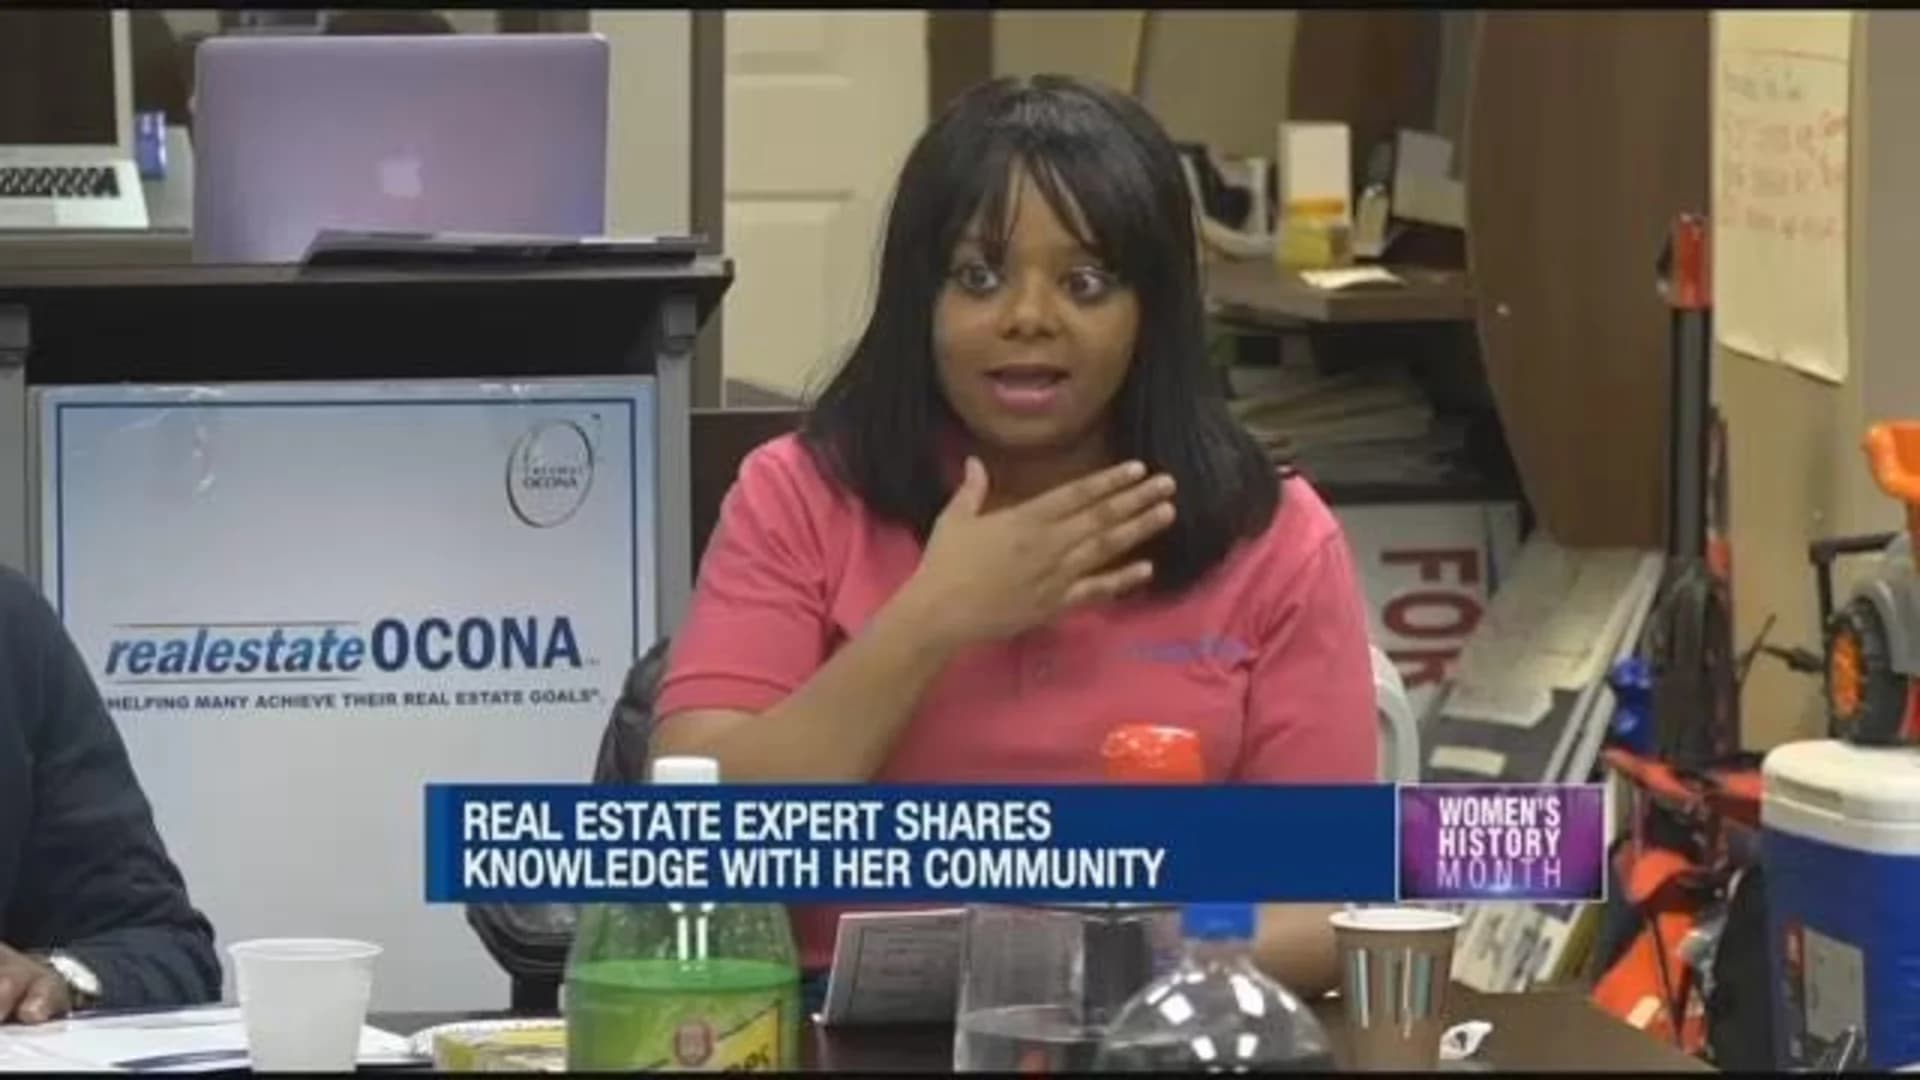 Real estate expert shares knowledge with her community